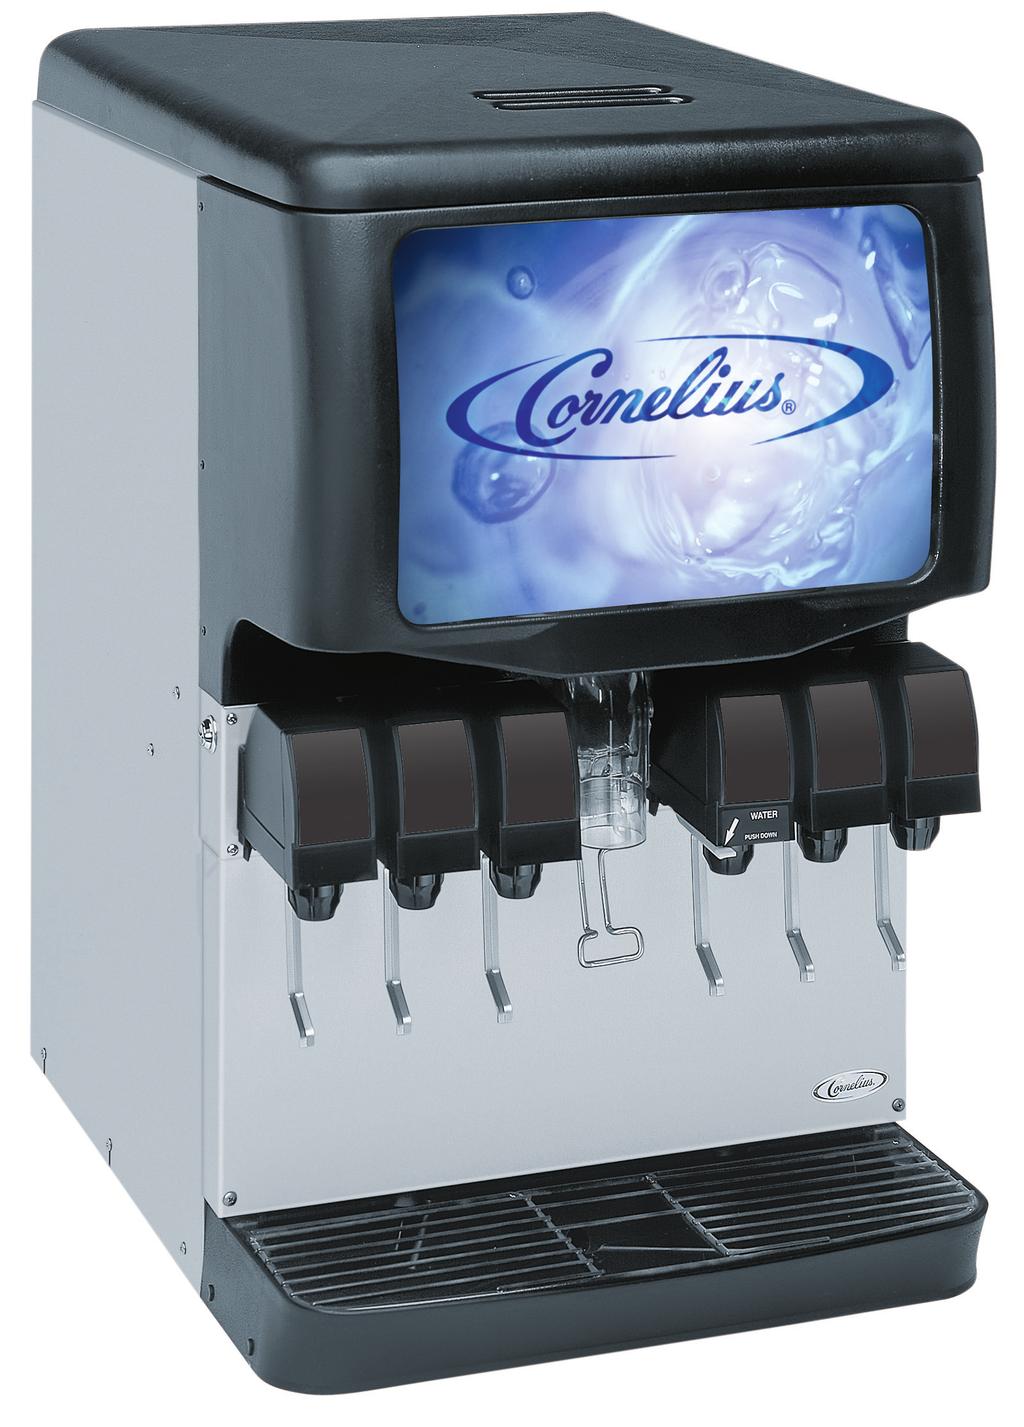 ENDURO 150 POST-MIX ICE DRINK DISPENSER FEATURES Large ice capactiy - 150 lb ice capacity Choices - Available with 6 UFB-1 TM sanitary lever or push button valves Merchandising - Highly efficient LED